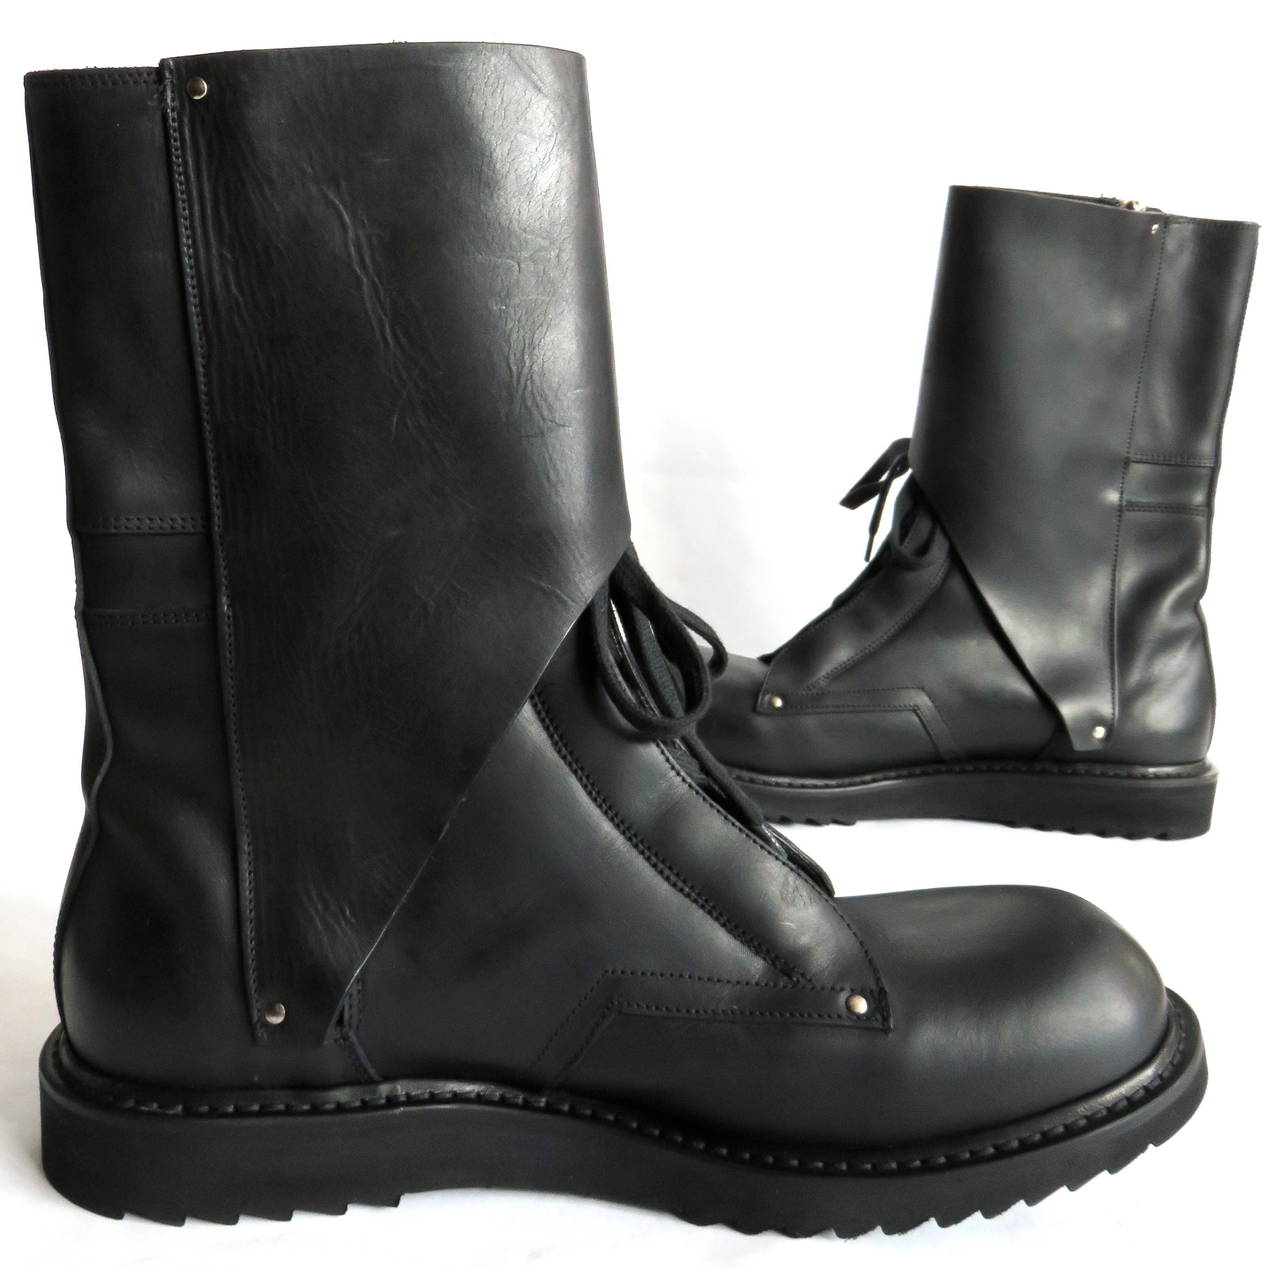 EDITOR'S NOTES:

Excellent condition RICK OWENS black leather combat-style boots

Lace-up style front with side metal zipper entry

Triangle-shaped, storm flap detail with twin straps and metal stud closures

High-quality, italian